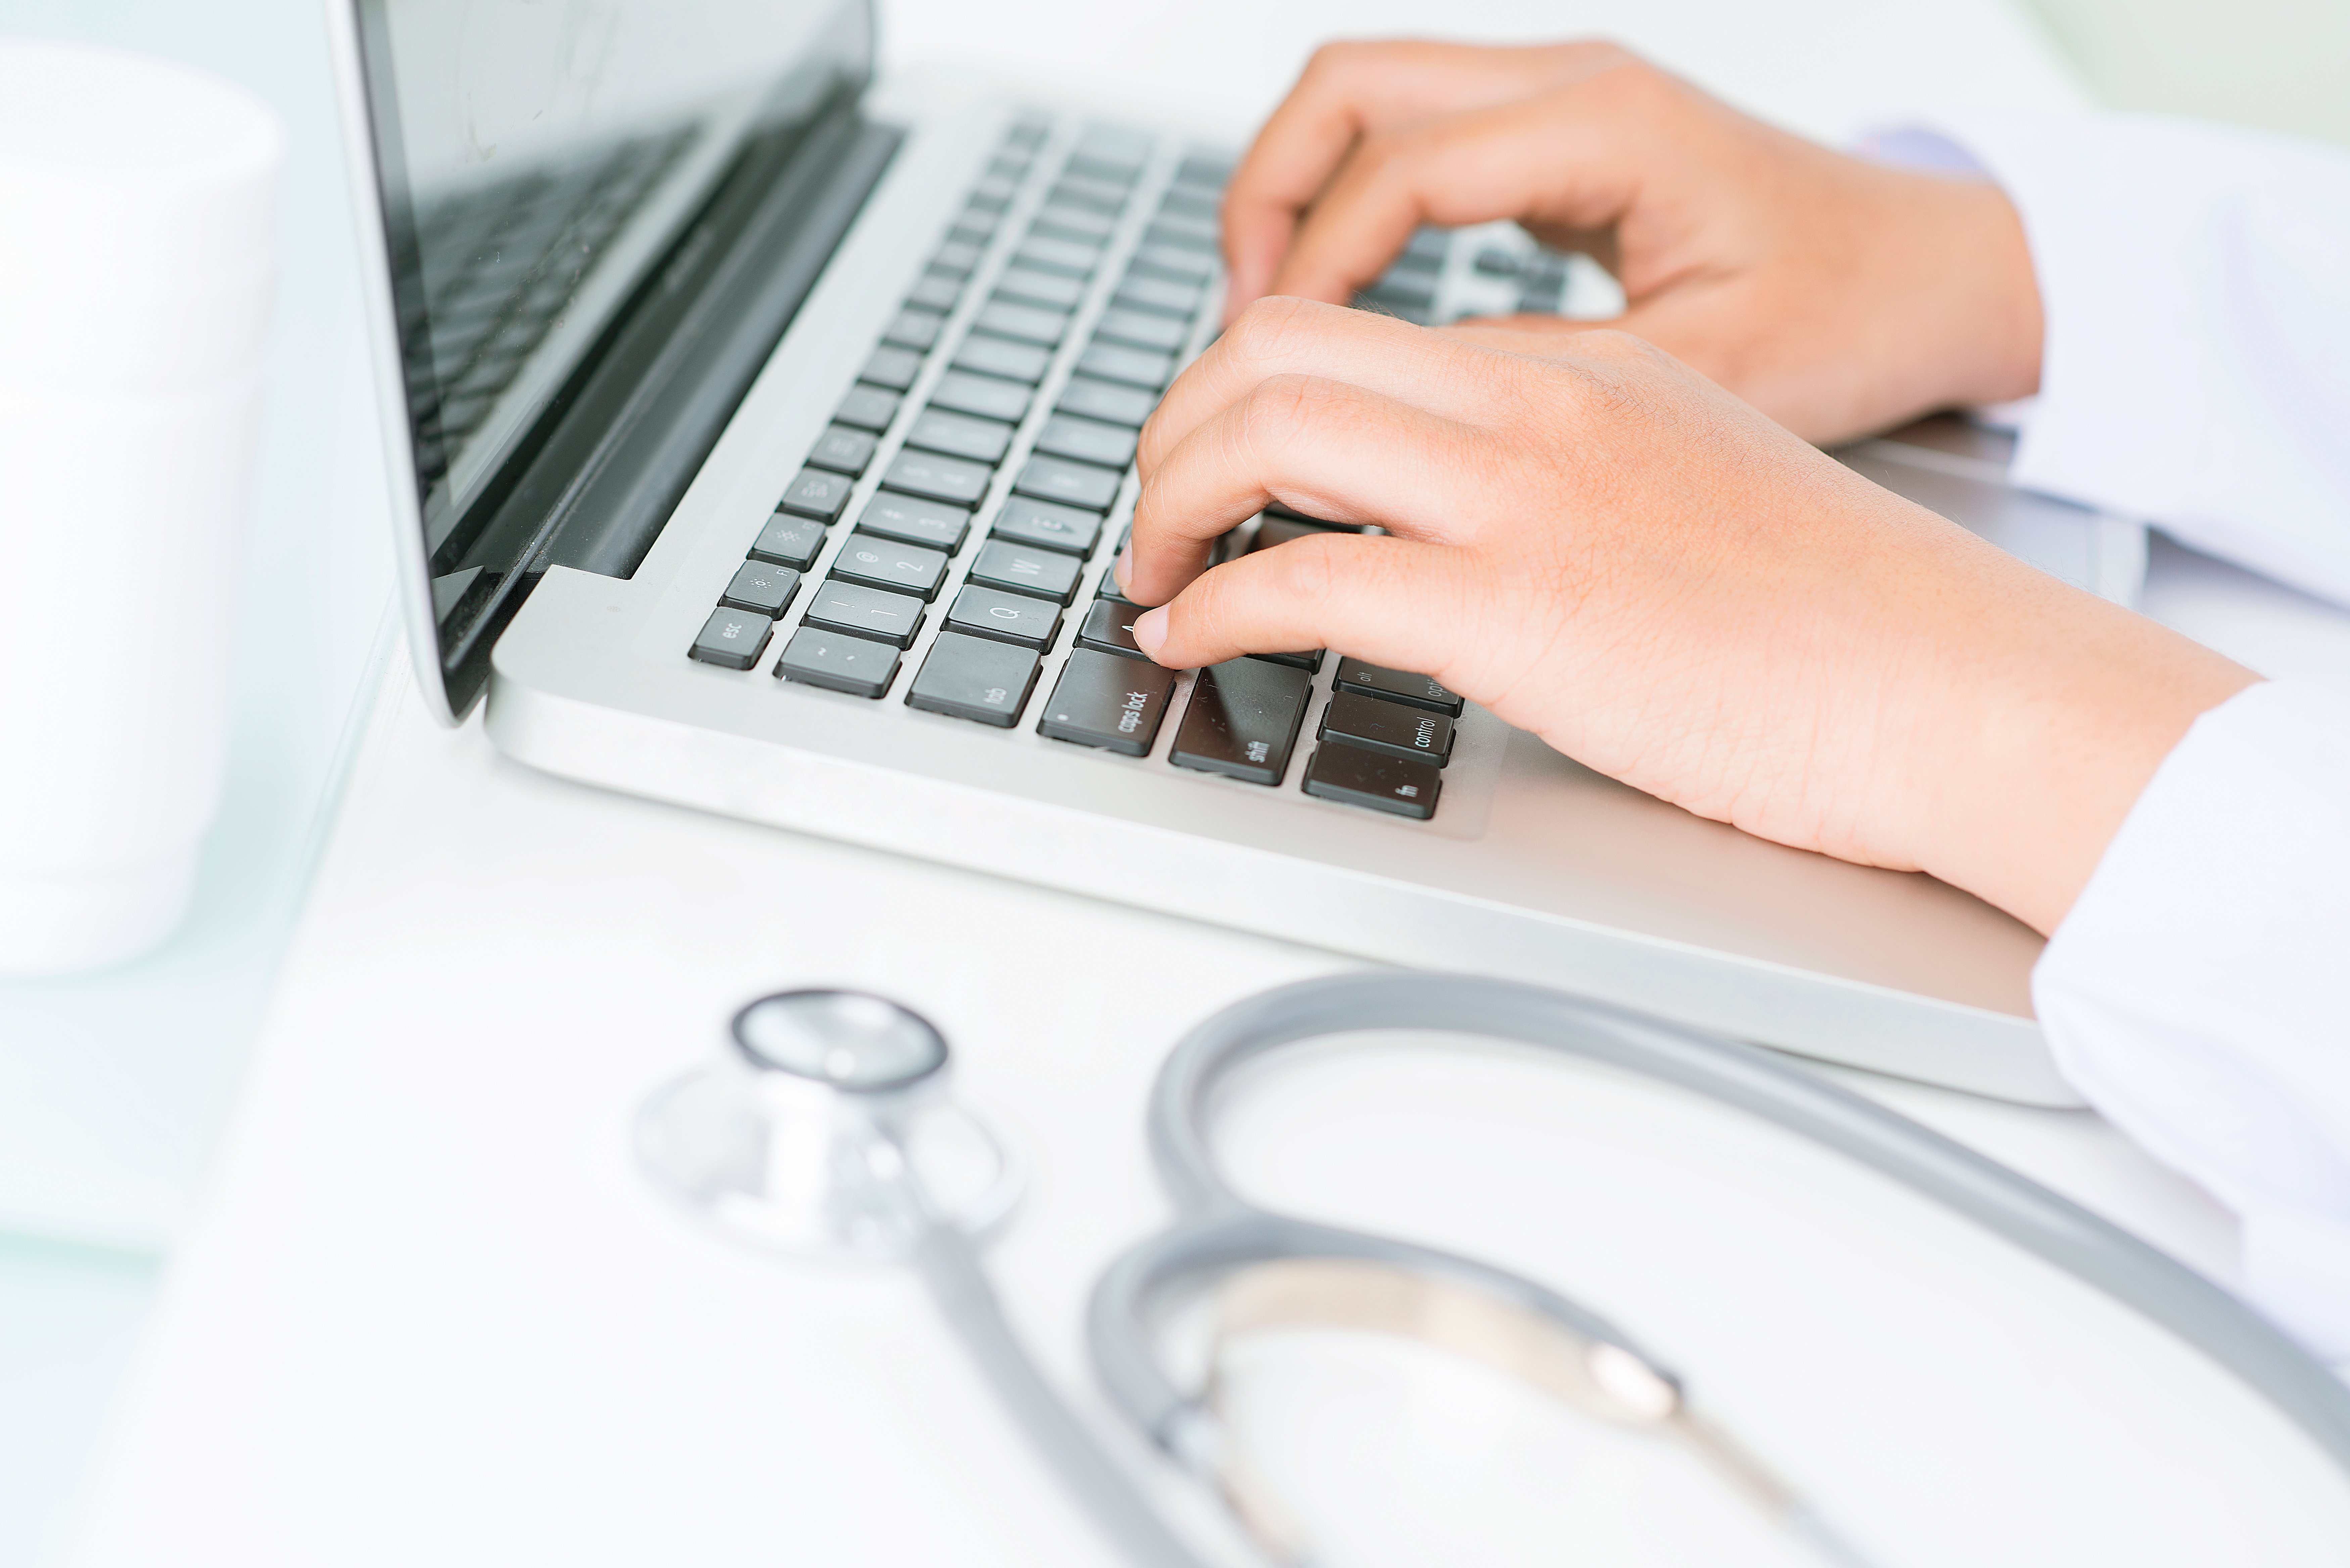 An informatics nurse properly implements appropriate use of patient record and health care information systems.